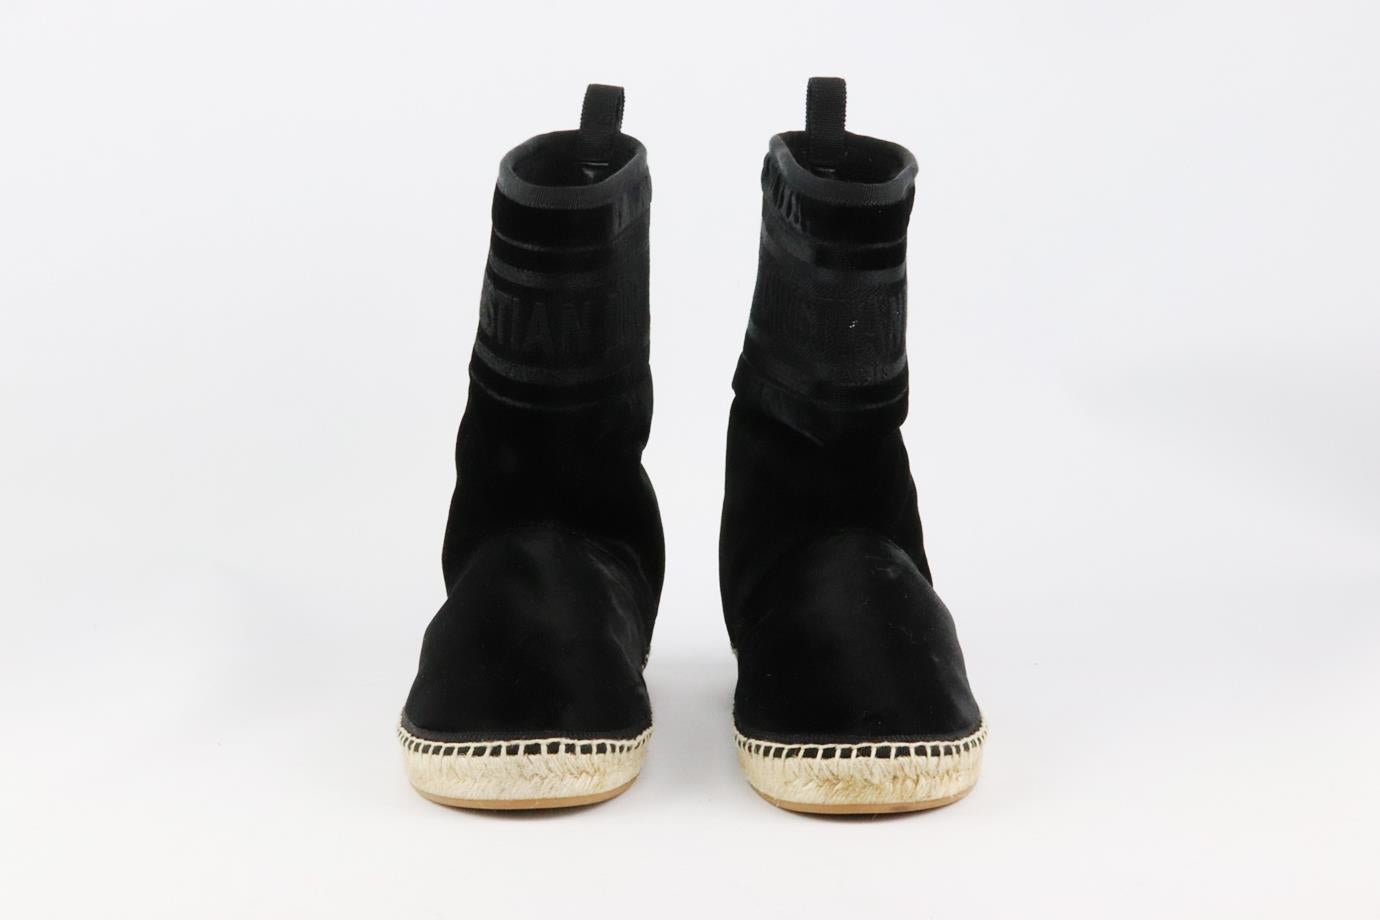 These 'Dior Chez Moi’ boots by Christian Dior are lined in cosy black shearling, this black velvet pair rests on a durable rubber sole and is lightly cushioned for added comfort, they have the Christian Dior logo around the ankle. Sole measures